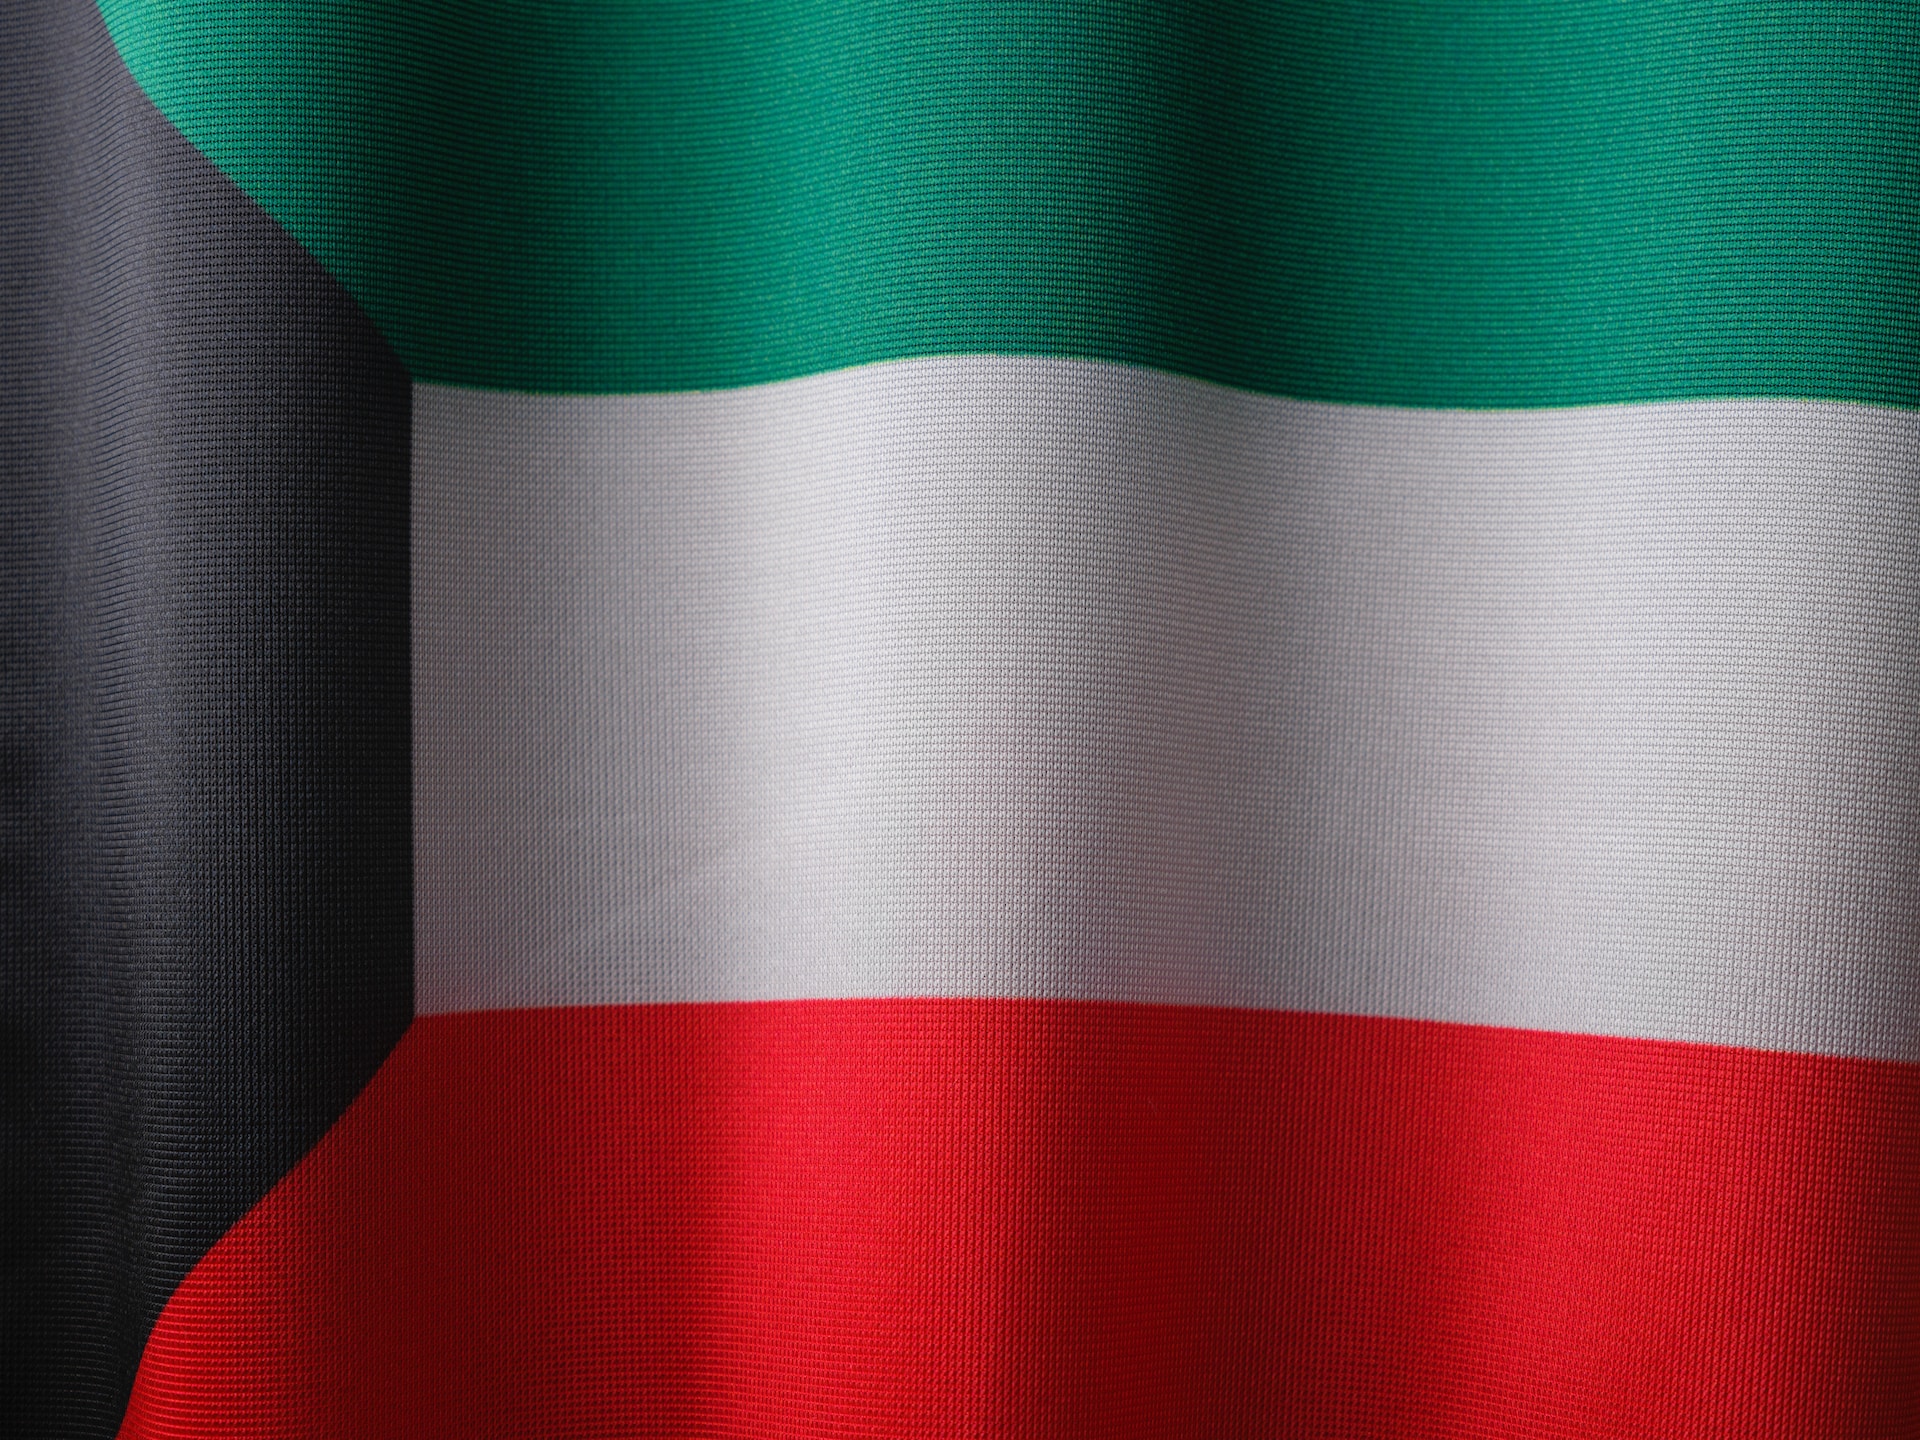 Employment Rules and Regulations in Kuwait